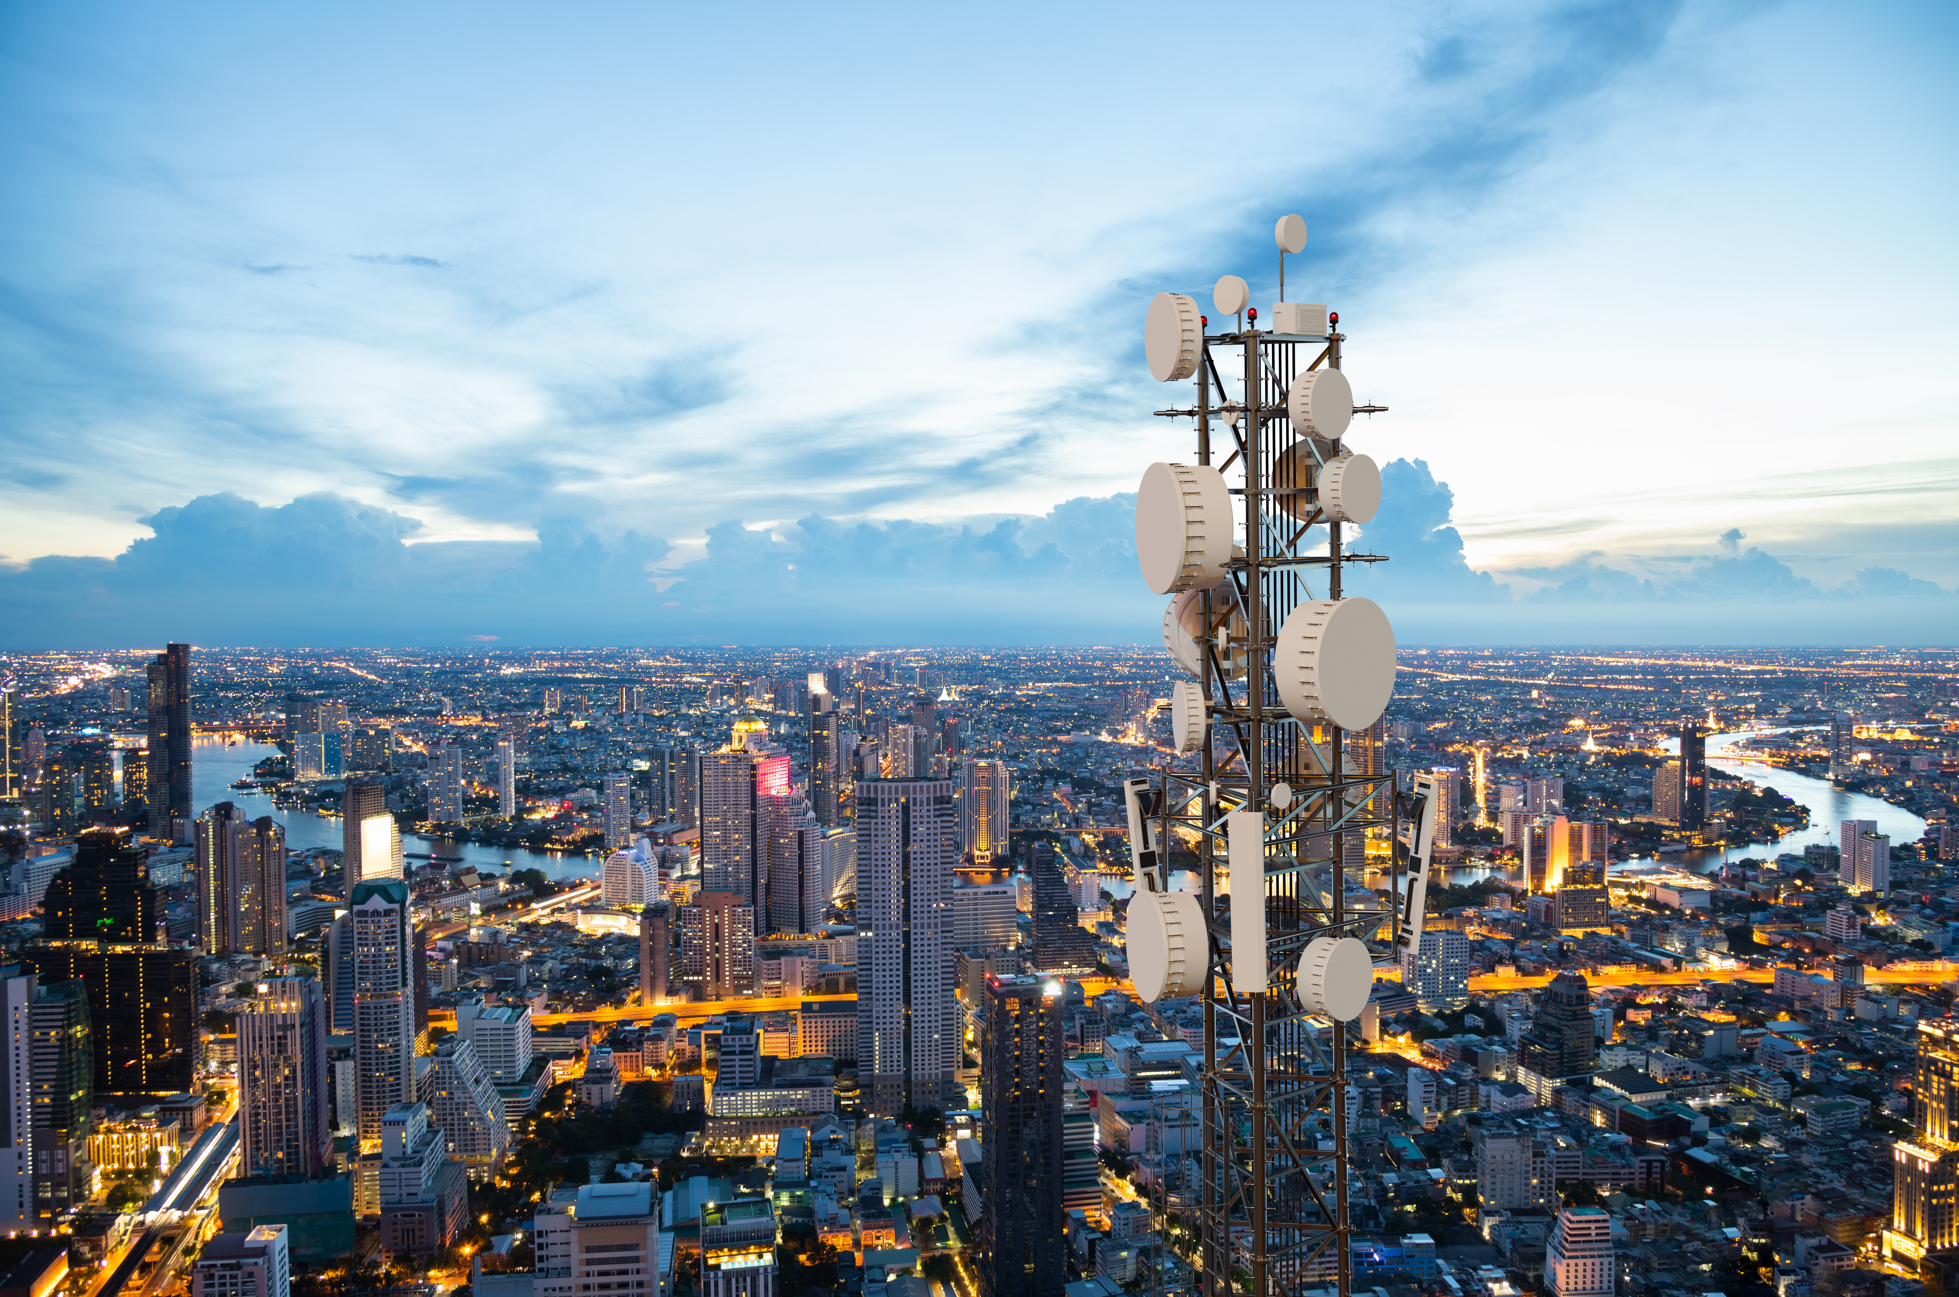 Secure 5G: accelerating 5G open radio access networks (Open RAN), for new telecoms networks to meet the UK’s future communications needs